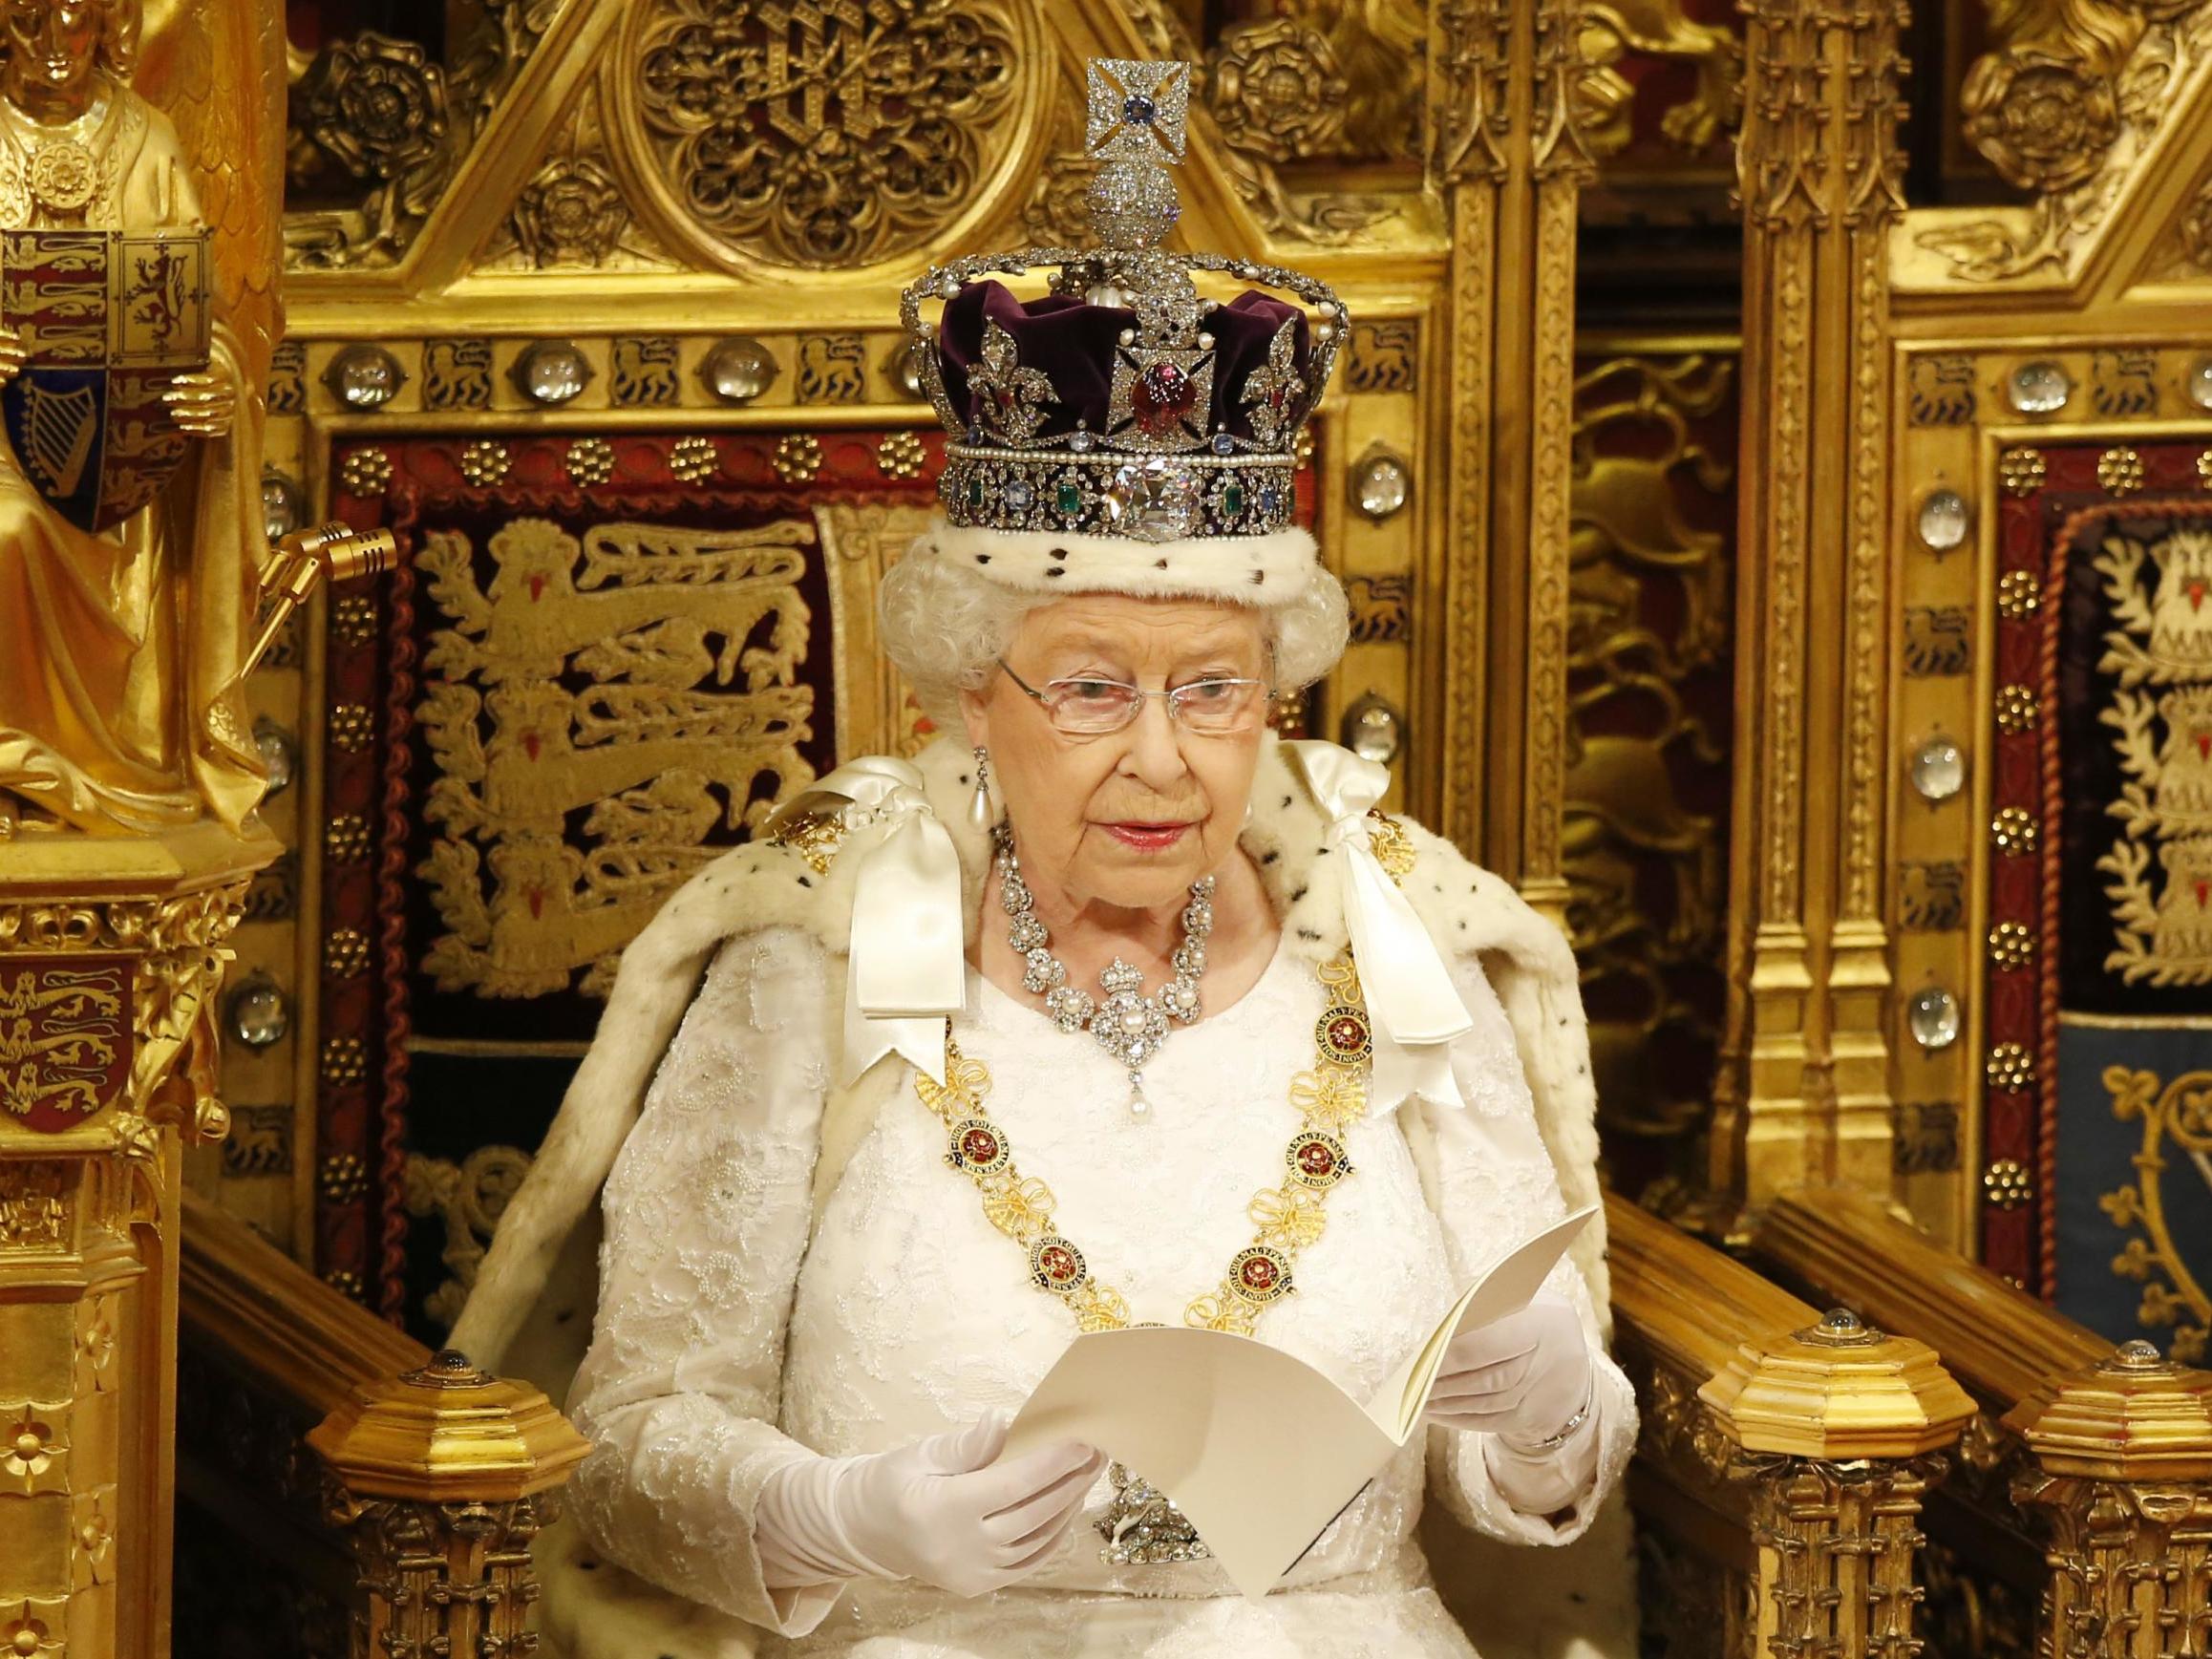 The Queen delivers a speech during the State Opening of Parliament in May 2016